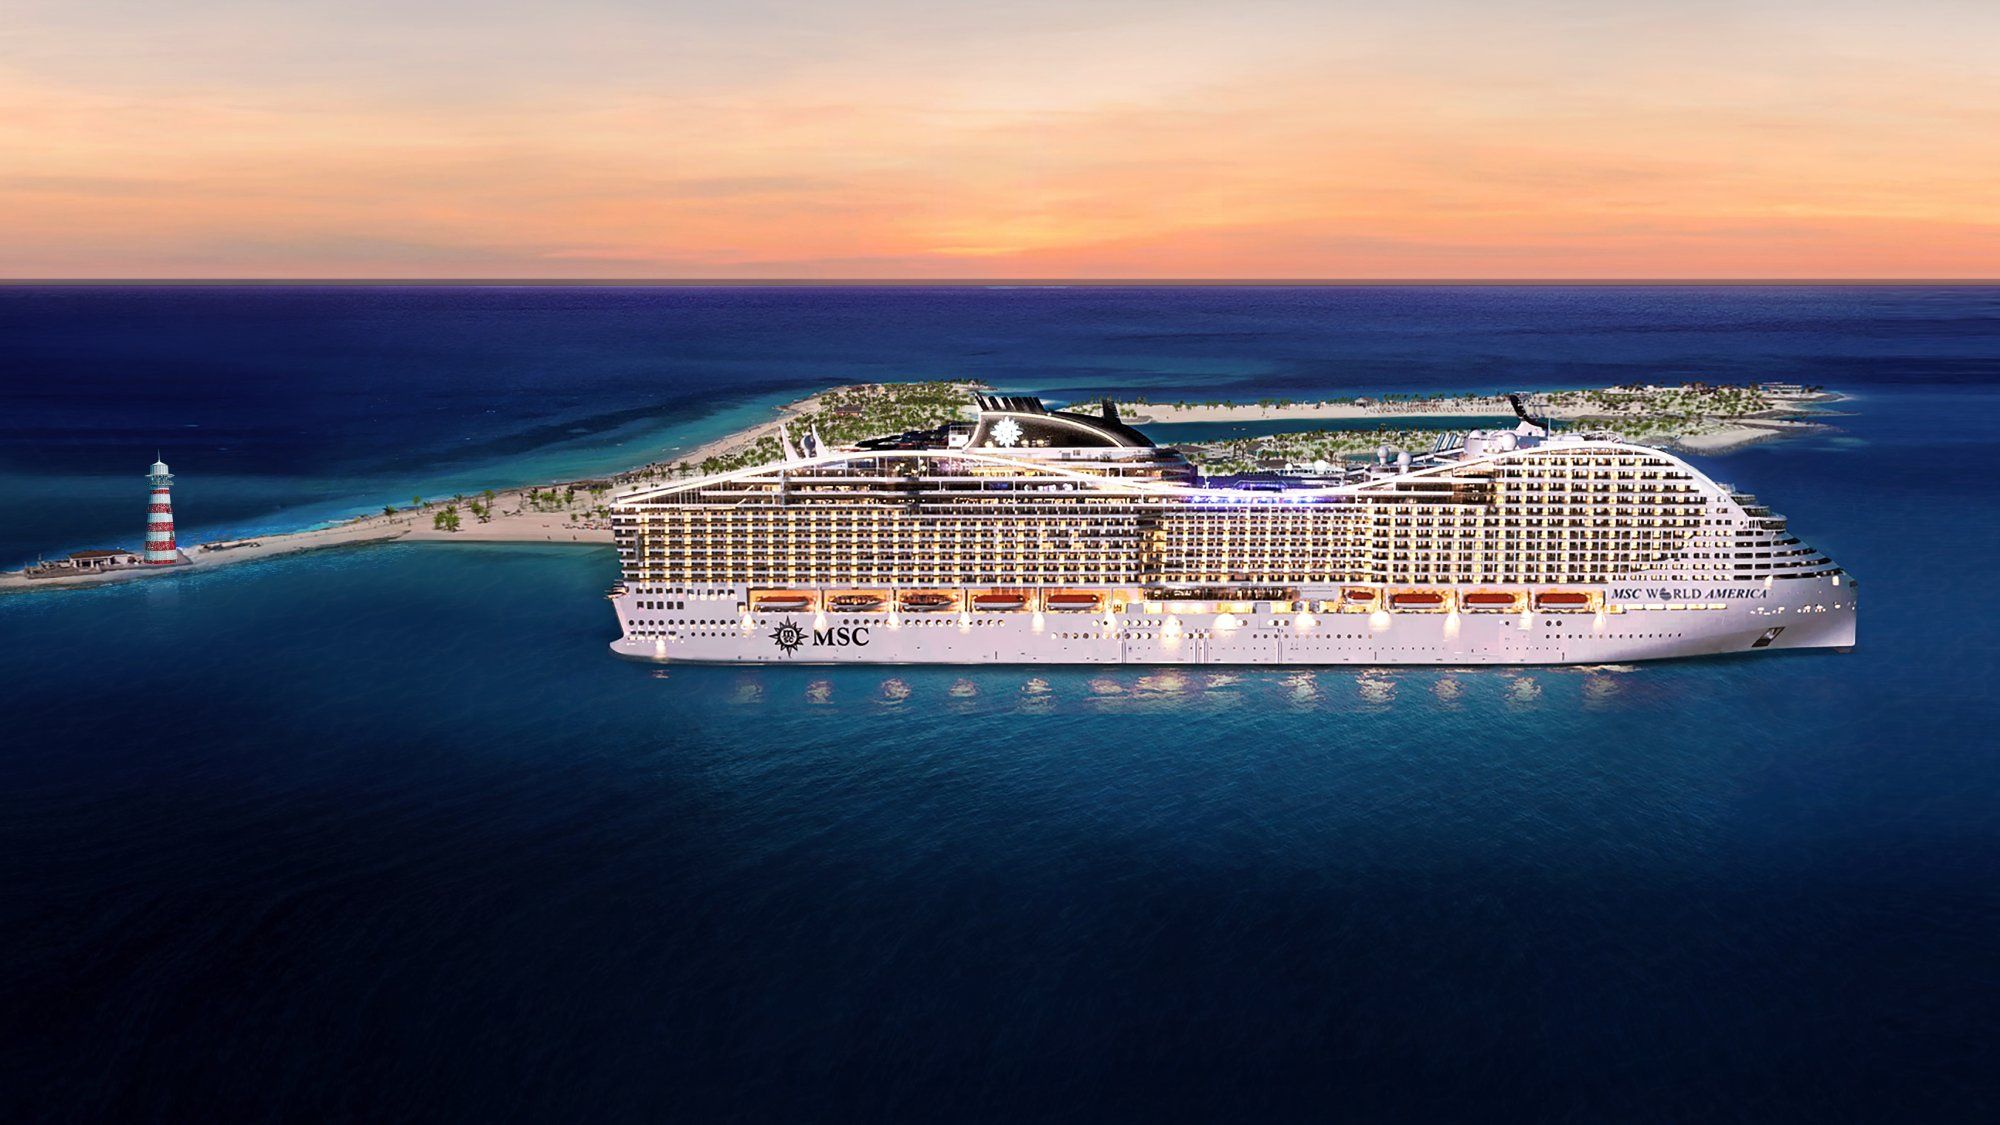 New Miami terminal to host naming ceremony for MSC World America: Travel Weekly